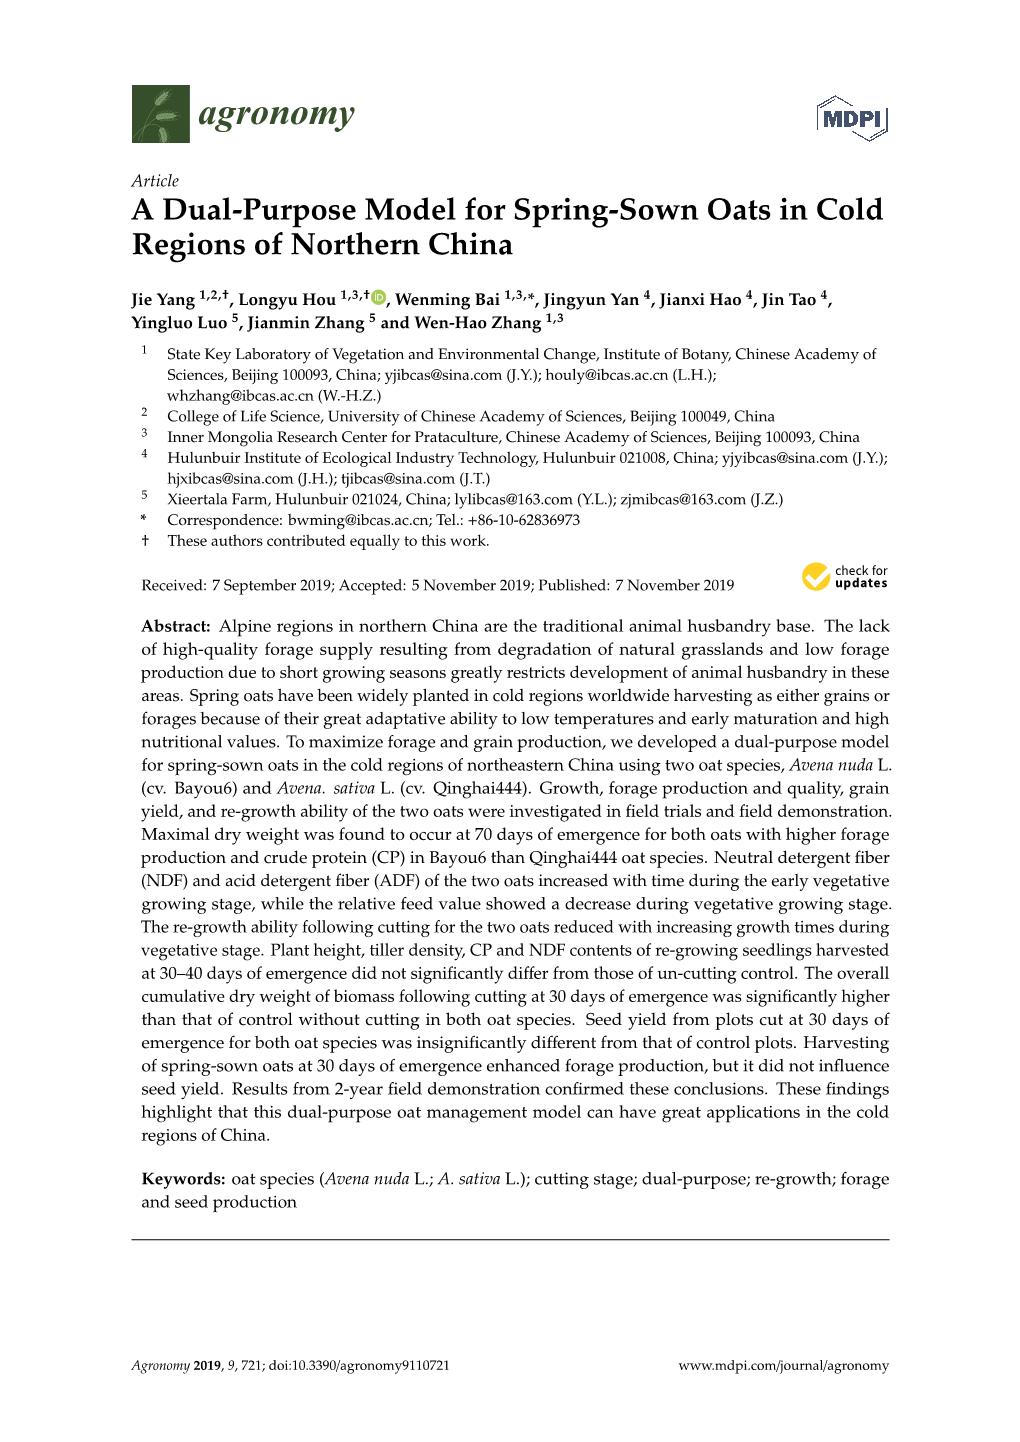 A Dual-Purpose Model for Spring-Sown Oats in Cold Regions of Northern China